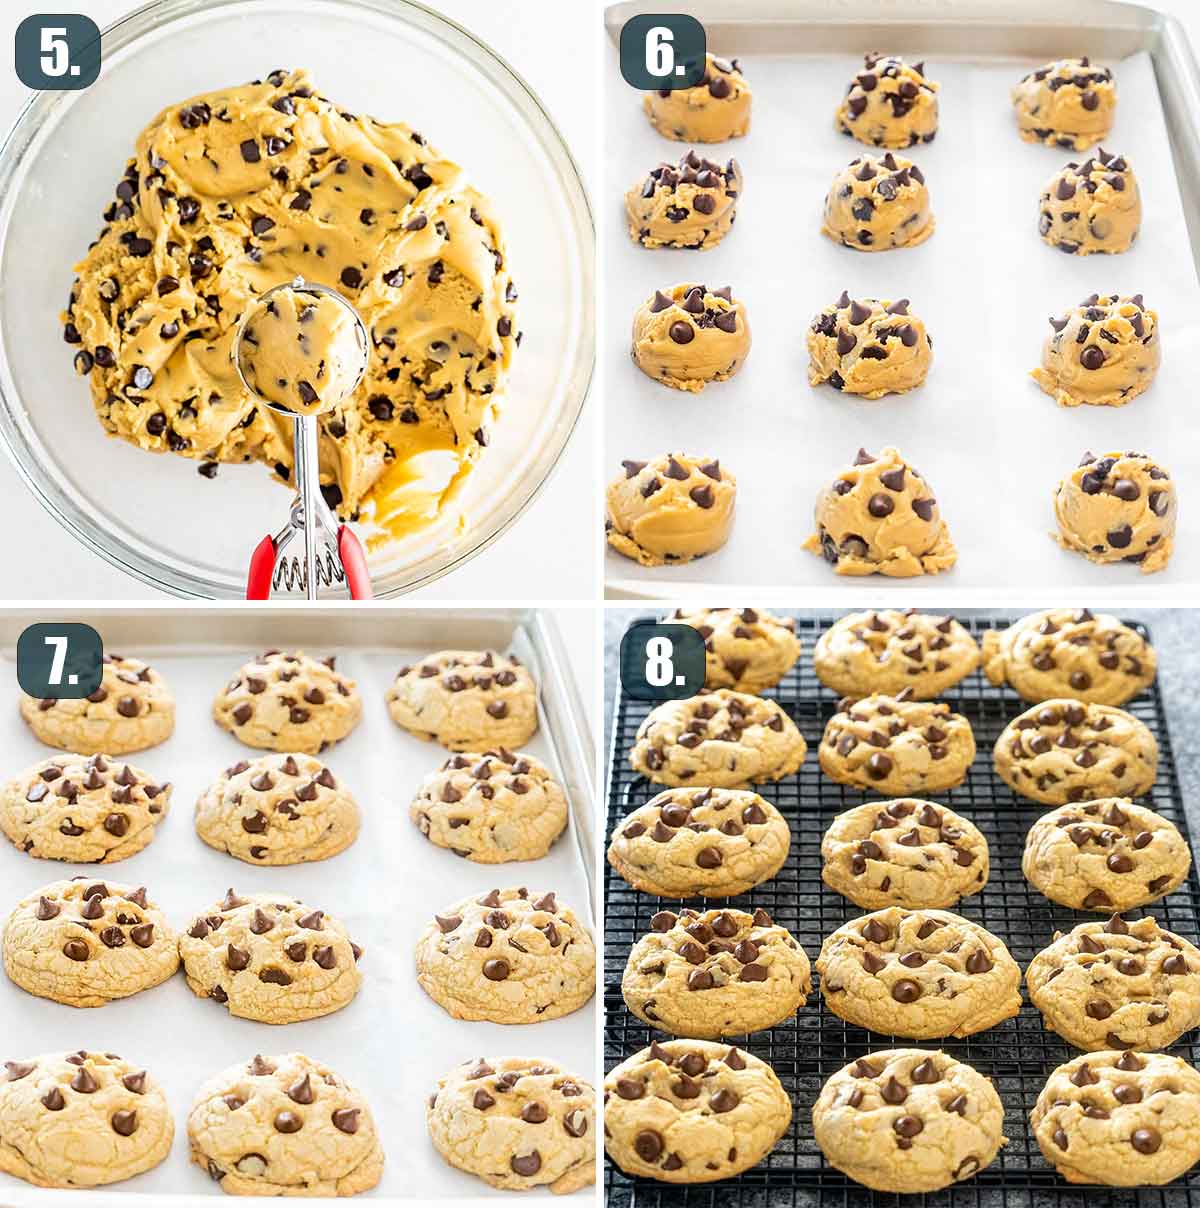 process shots showing how to finish making chocolate chip cookies and bake them.